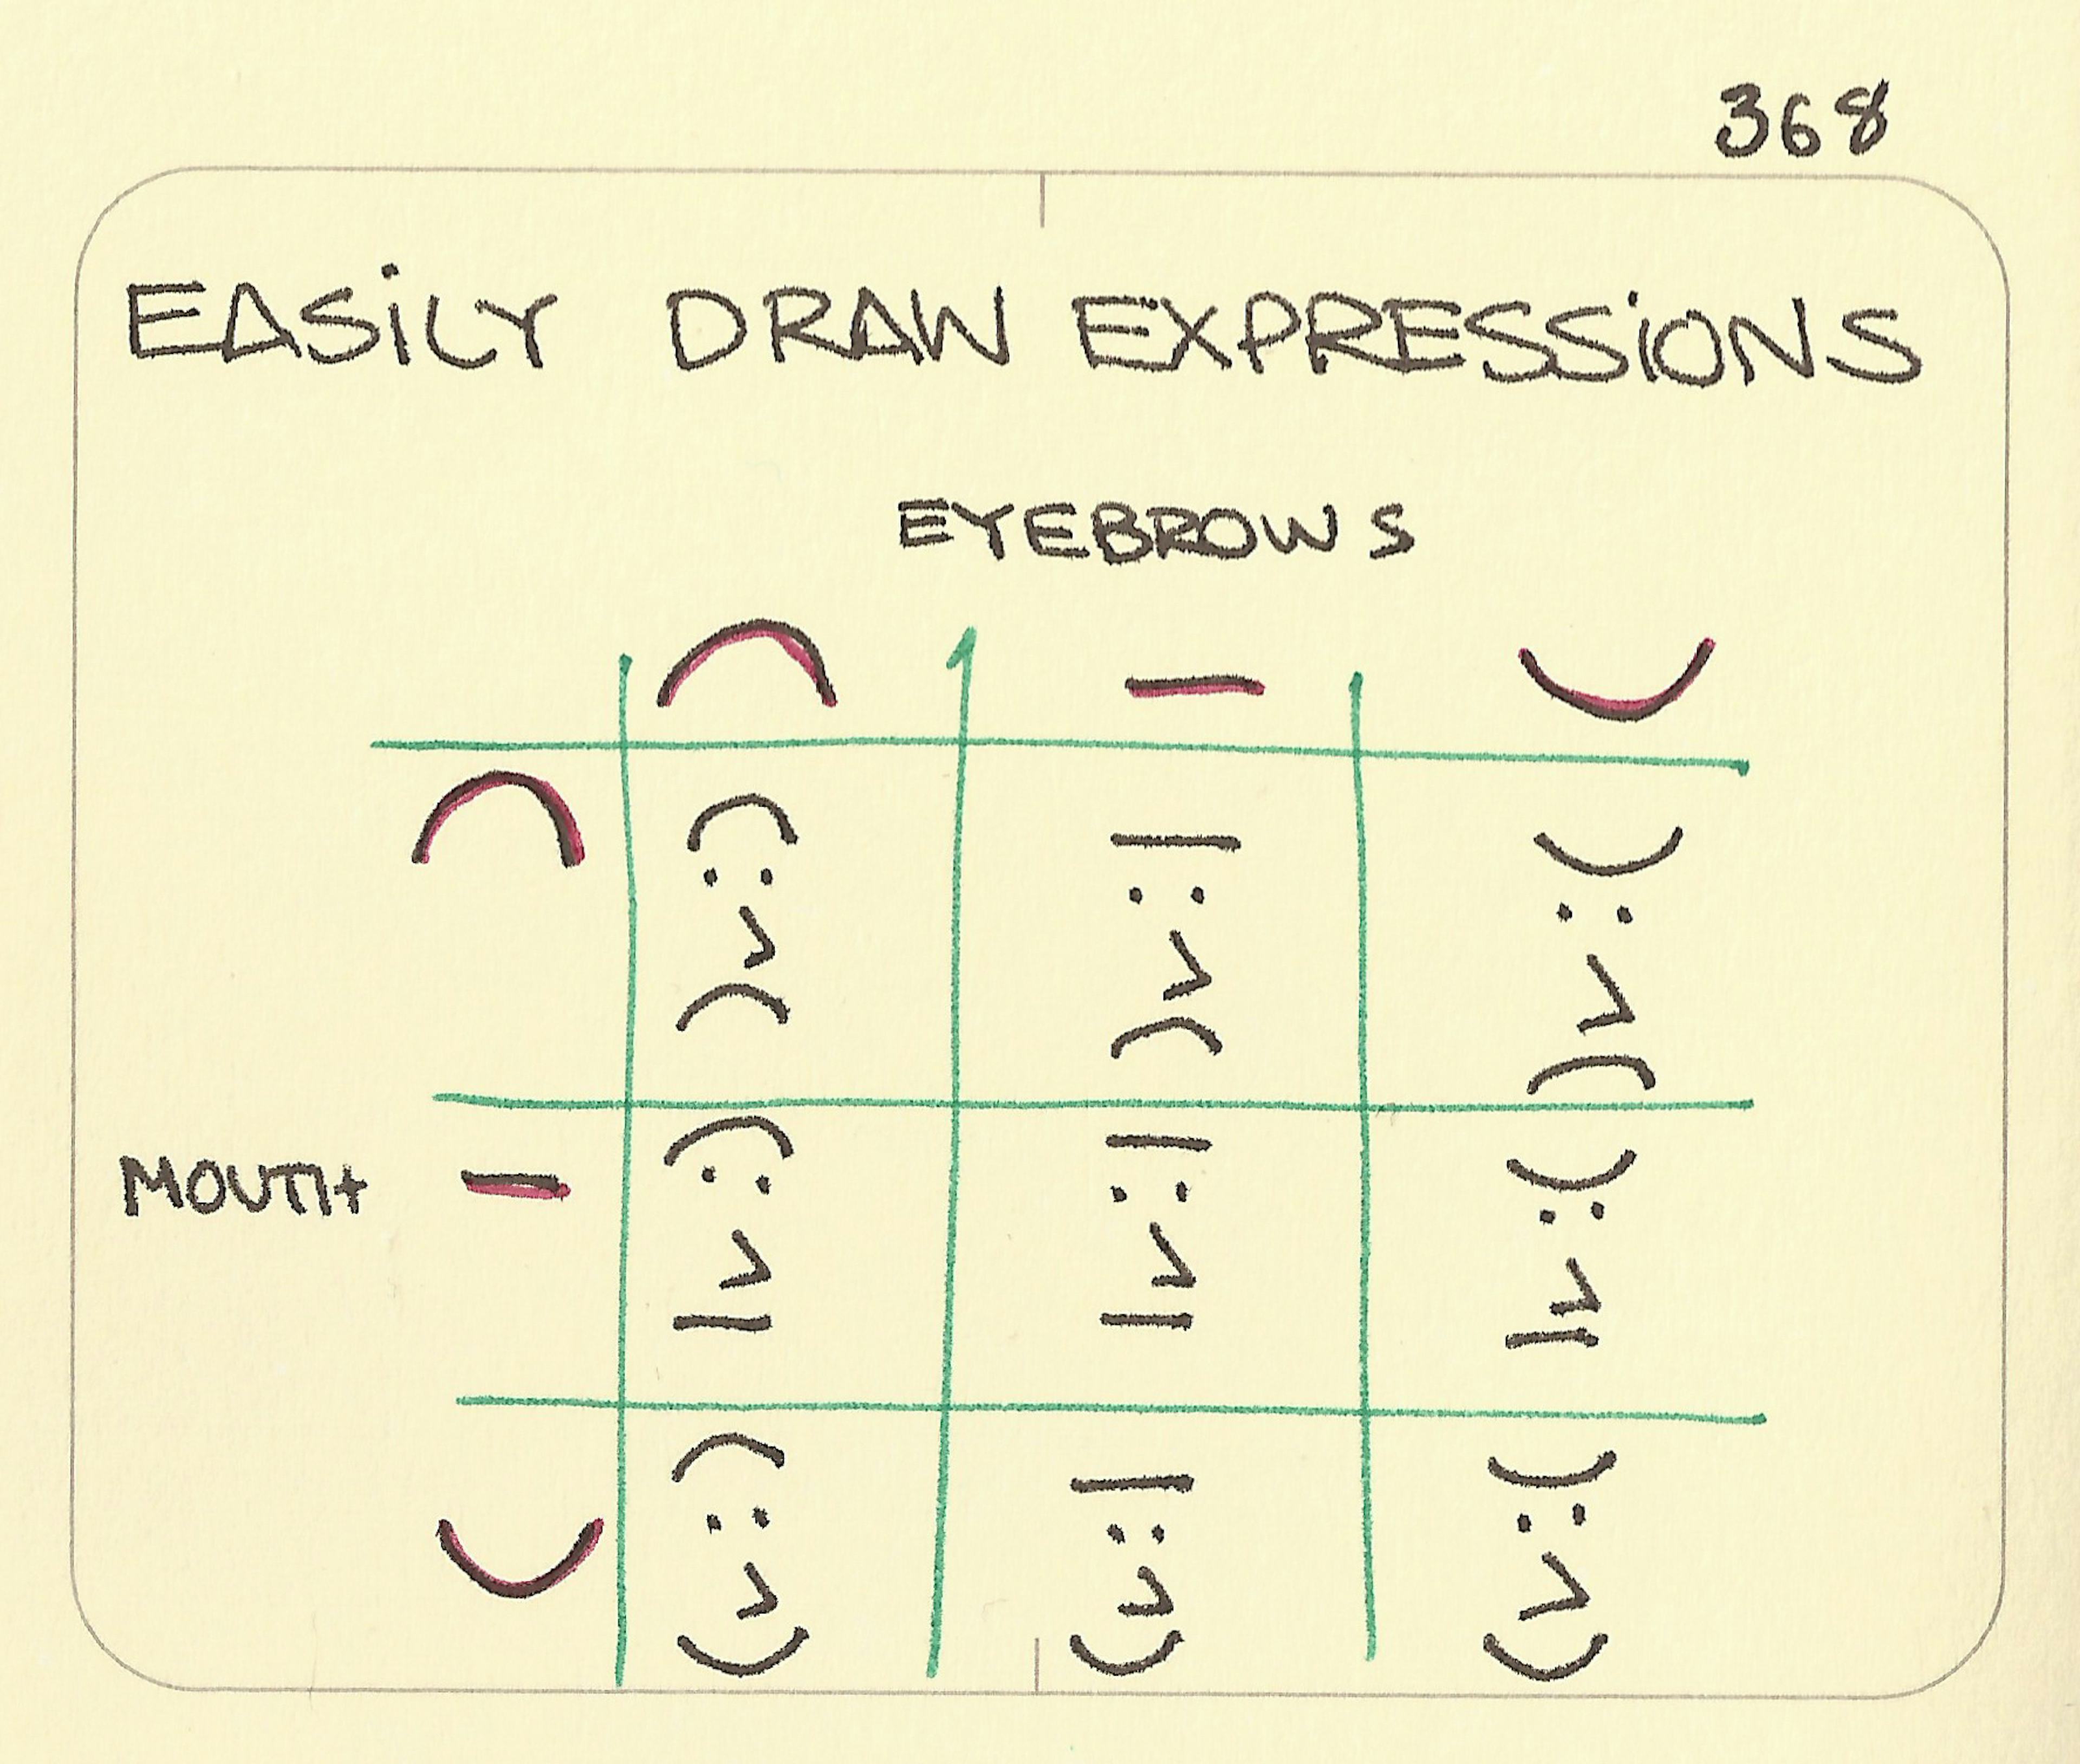 Easily draw expressions - Sketchplanations